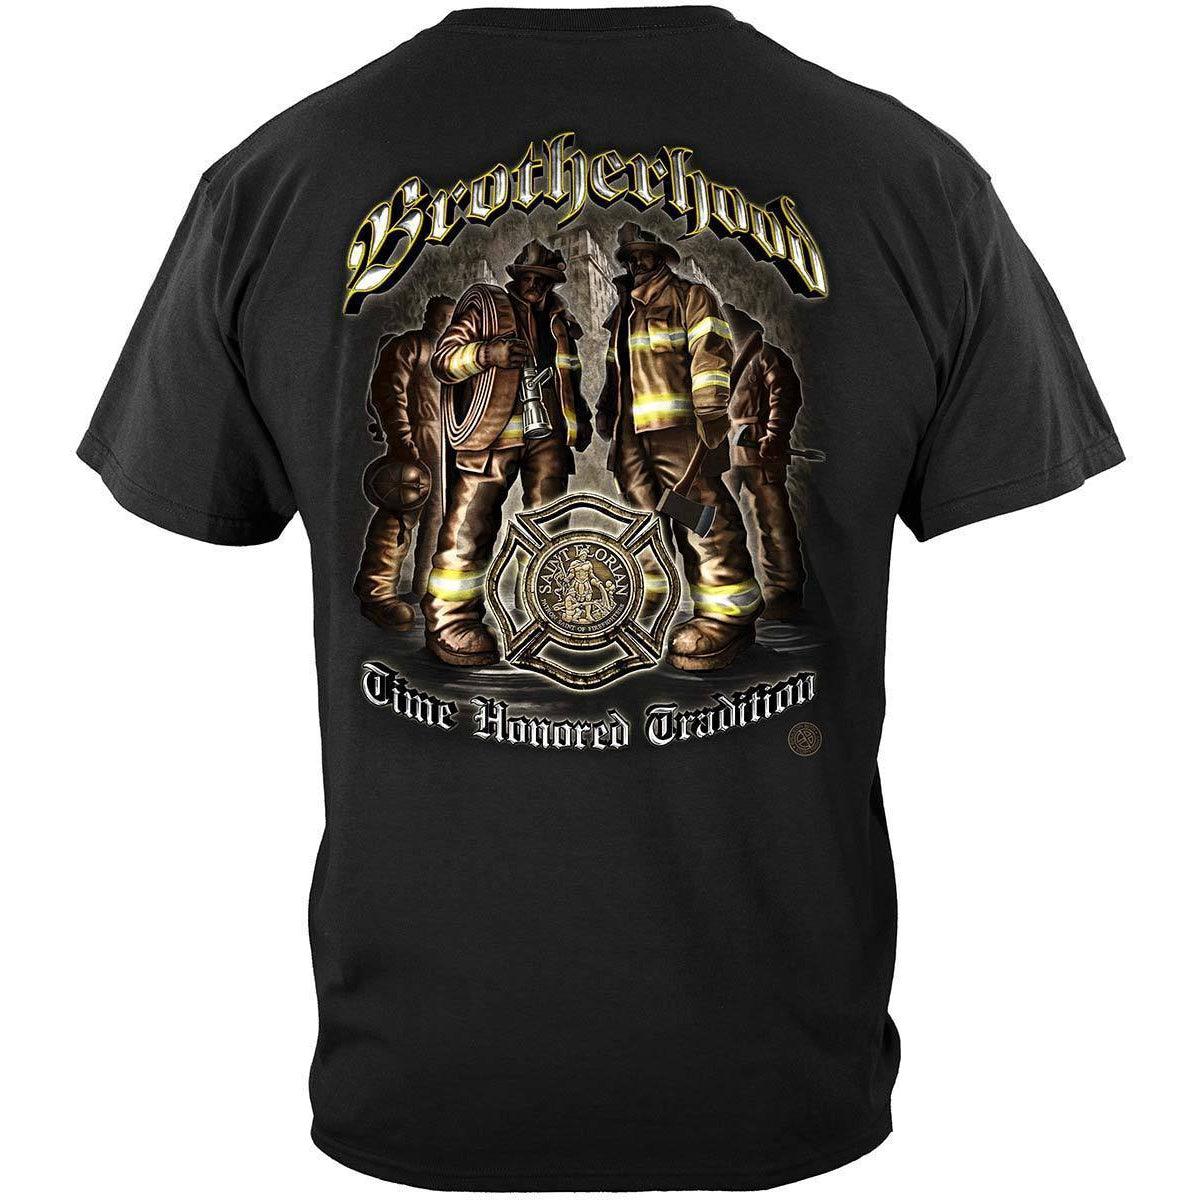 Firefighter Time Honor Tradition Premium T-shirt - Military Republic